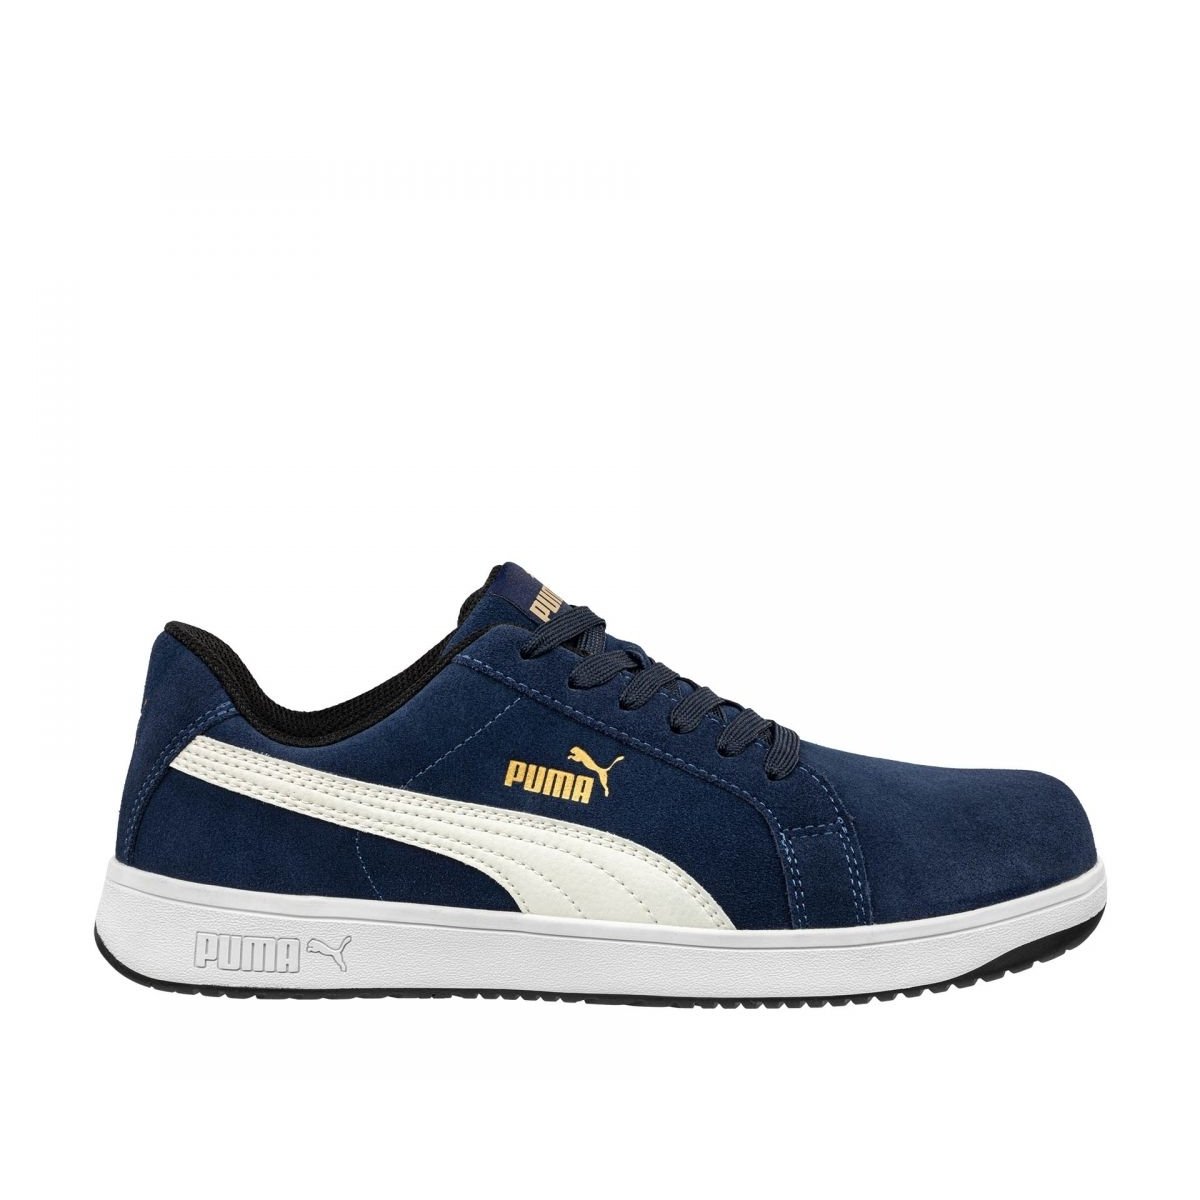 PUMA Safety Men's Iconic Low Composite Toe EH Work Shoes Navy Suede - 640025 ONE SIZE Navy - Navy, 15